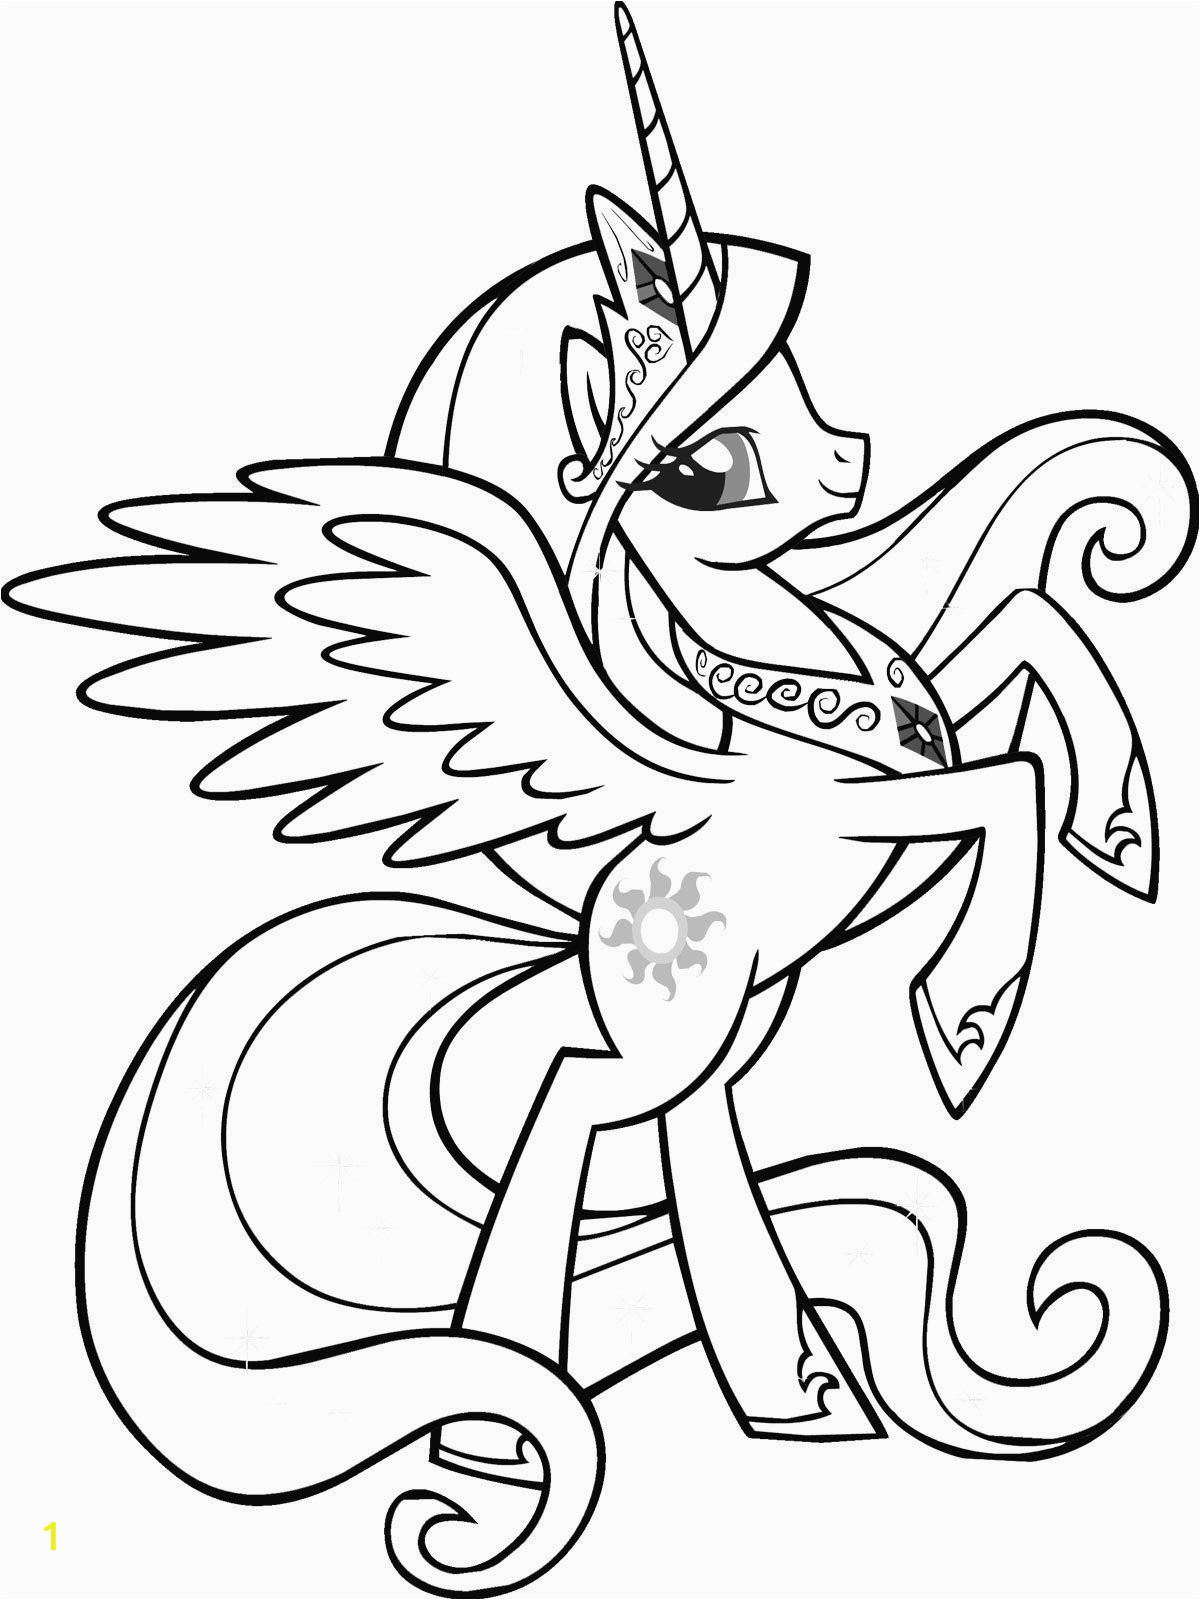 princess luna my little pony coloring page luxury my little pony coloring pages princess luna lovely pin od of princess luna my little pony coloring page